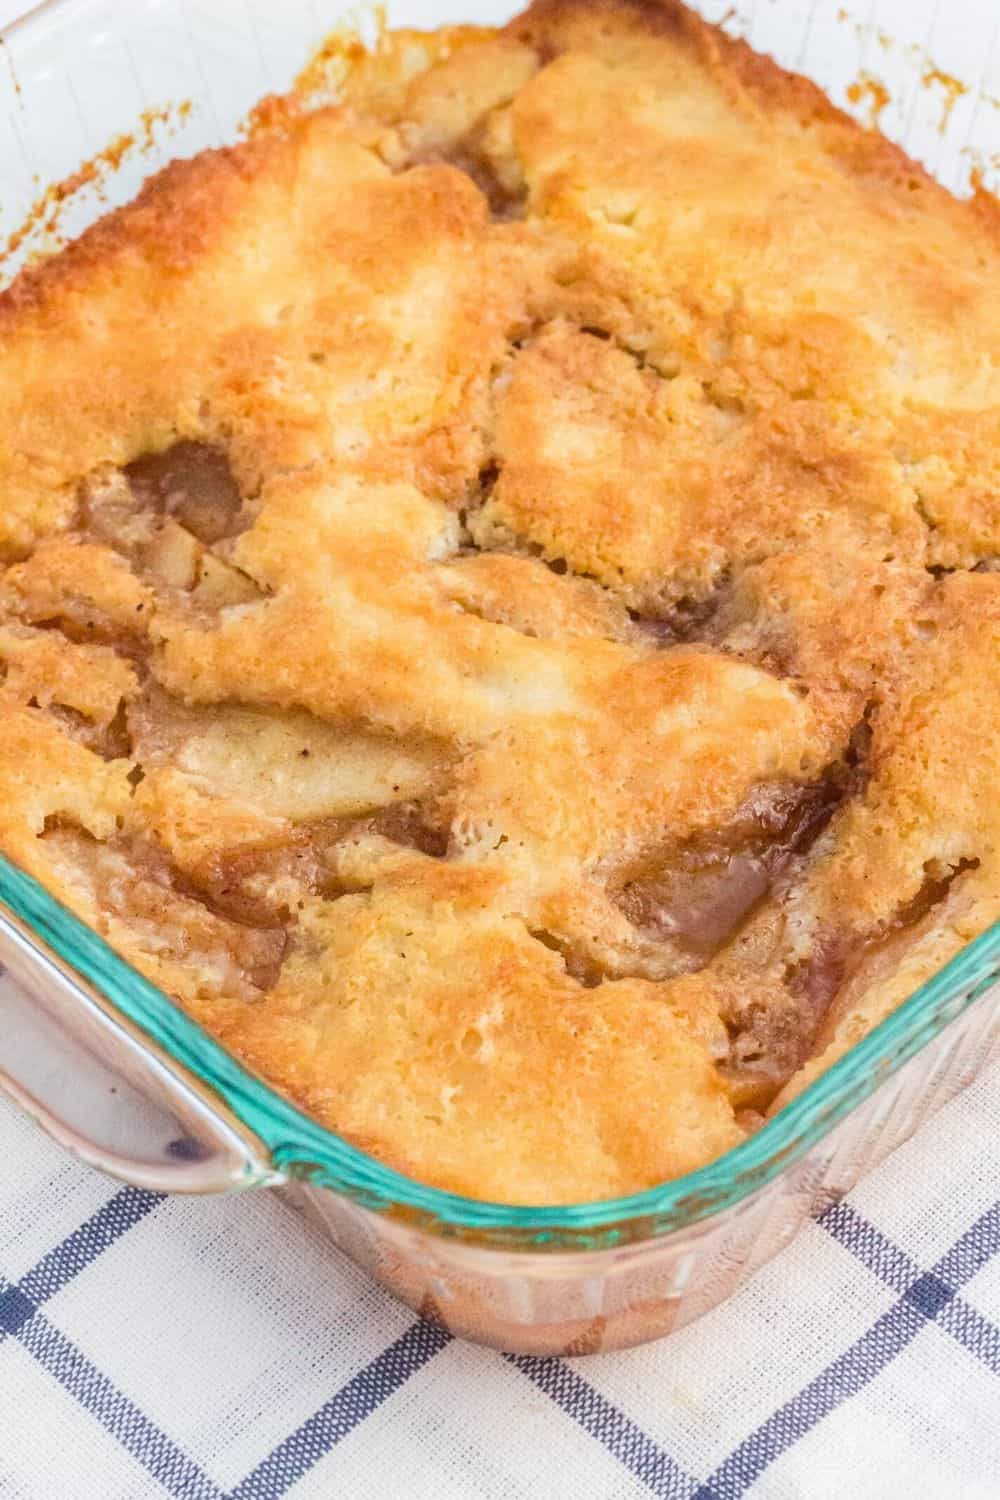 freshly baked pear cobbler in a glass baking dish, setting on a blue and white checkered cloth napkin.